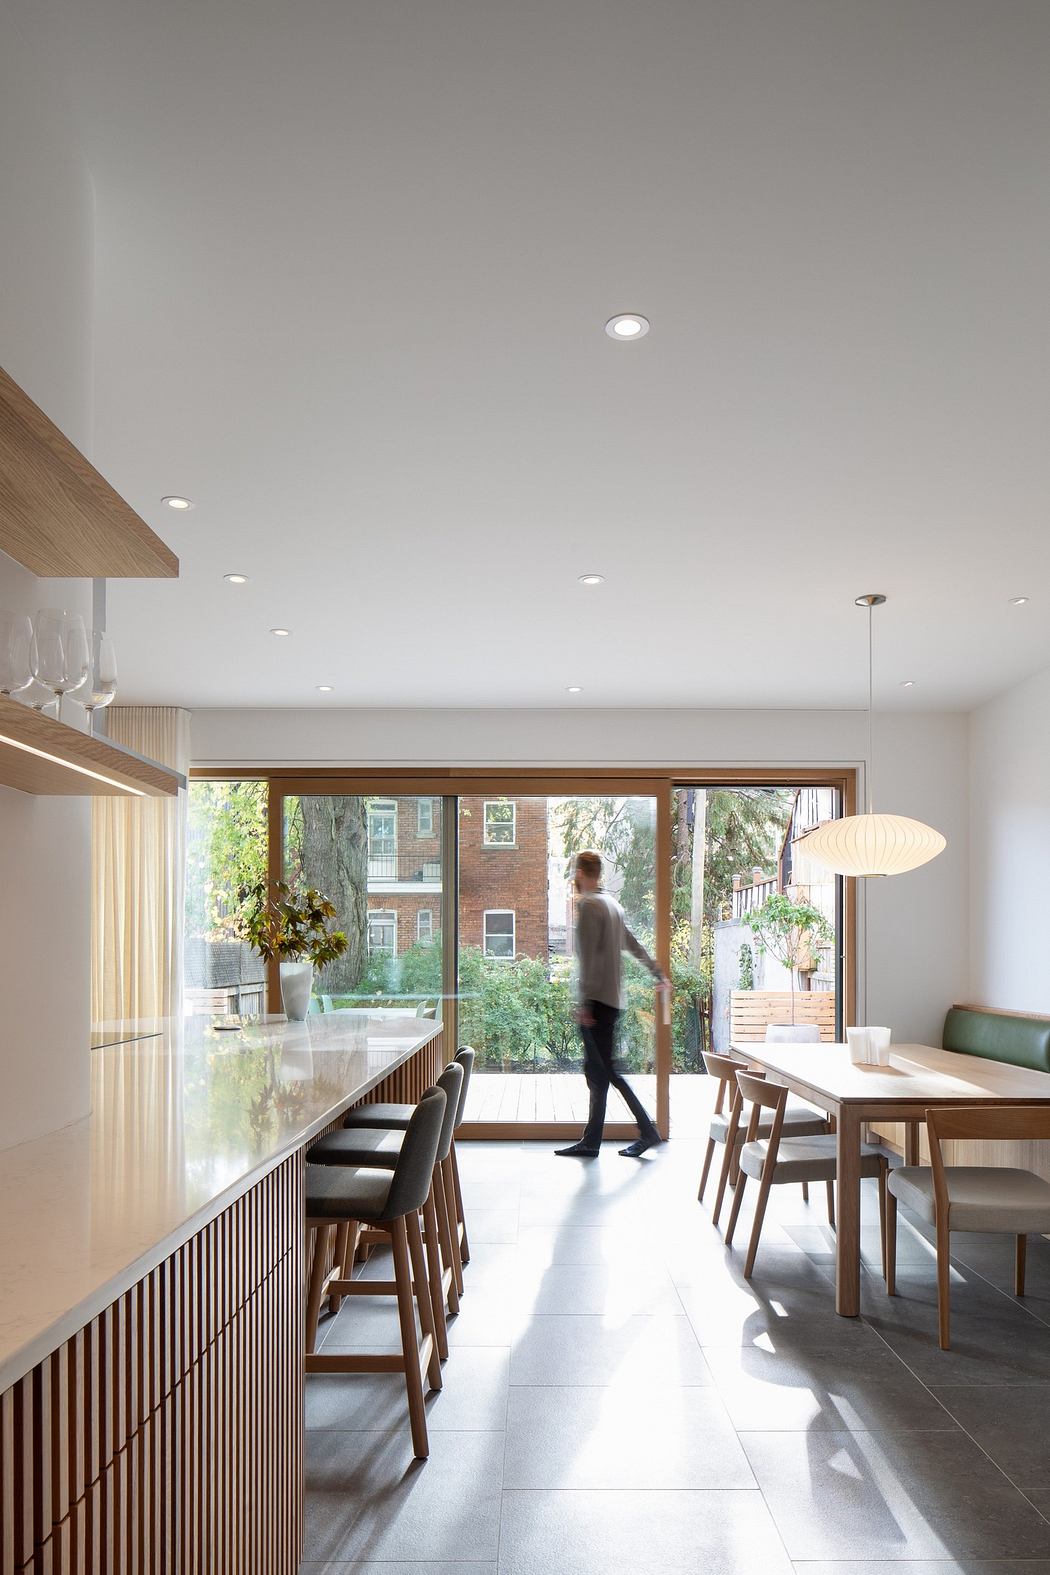 Modern kitchen with dining area leading to a garden, person in the background.